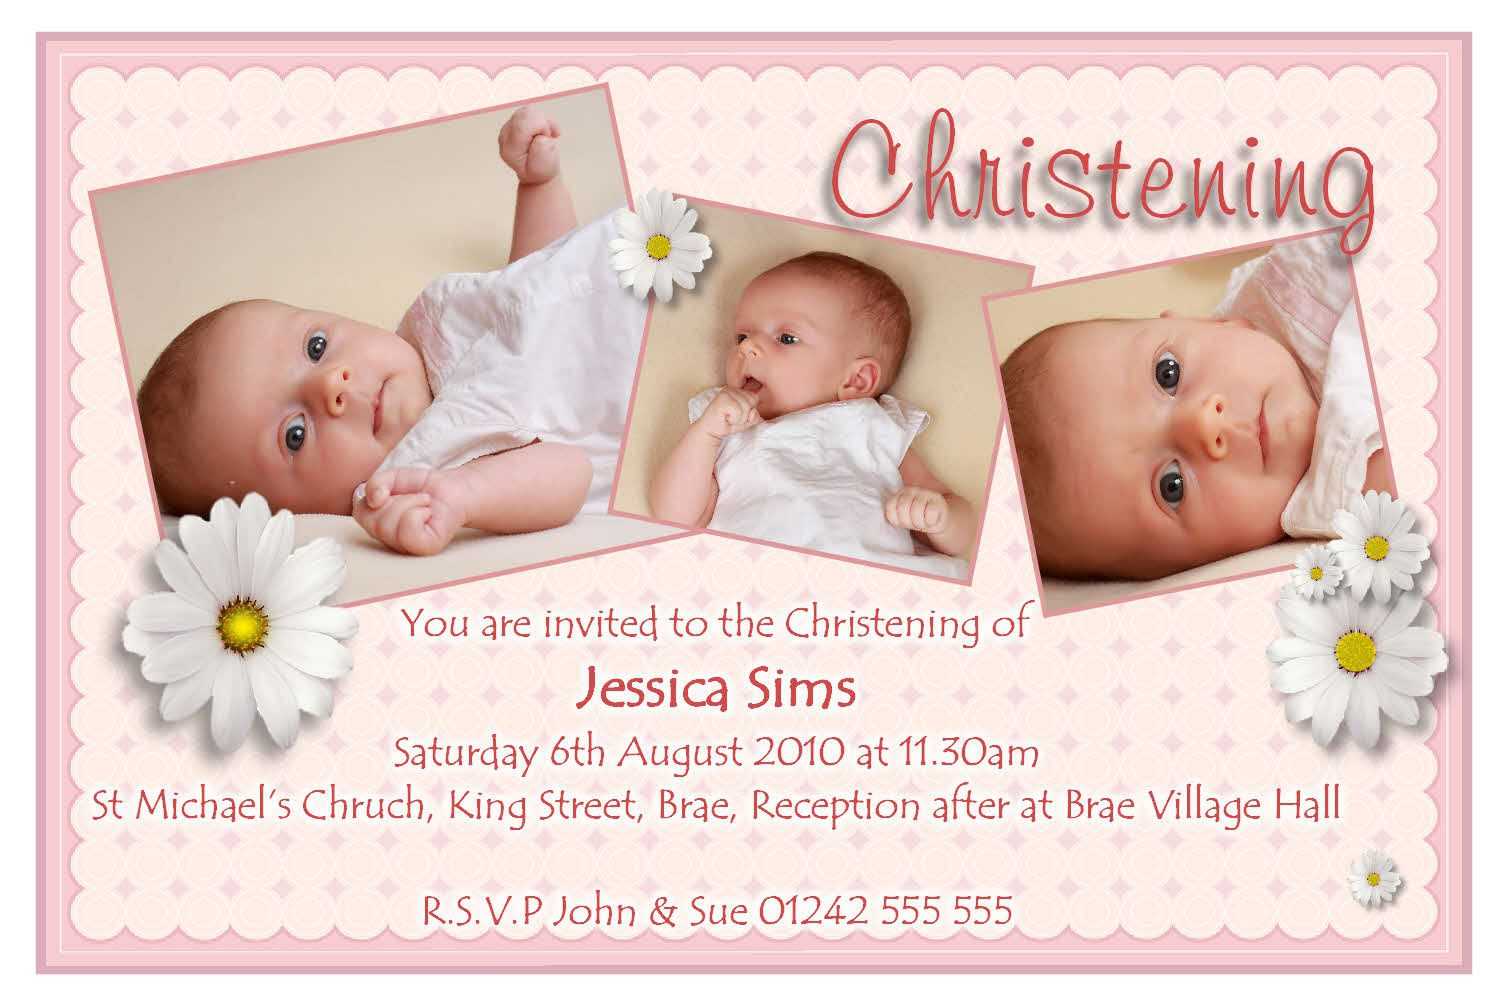 Invitation Card For Christening Samples Throughout Baptism Invitation Card Template